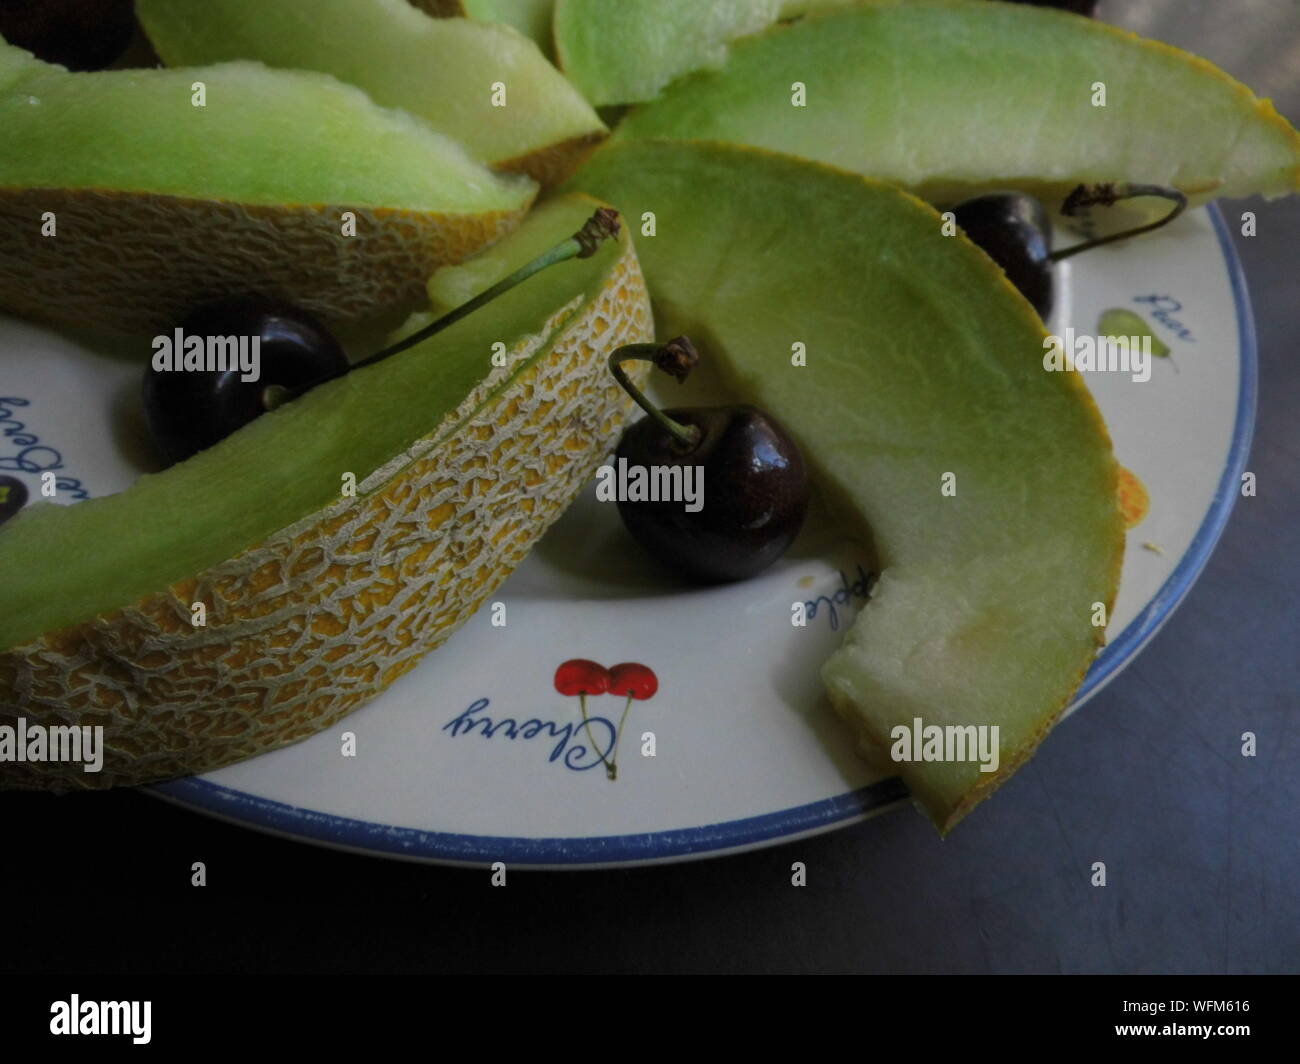 High Angle View Of Honeydew Melon And Black Cherry Fruits In Plate Stock Photo